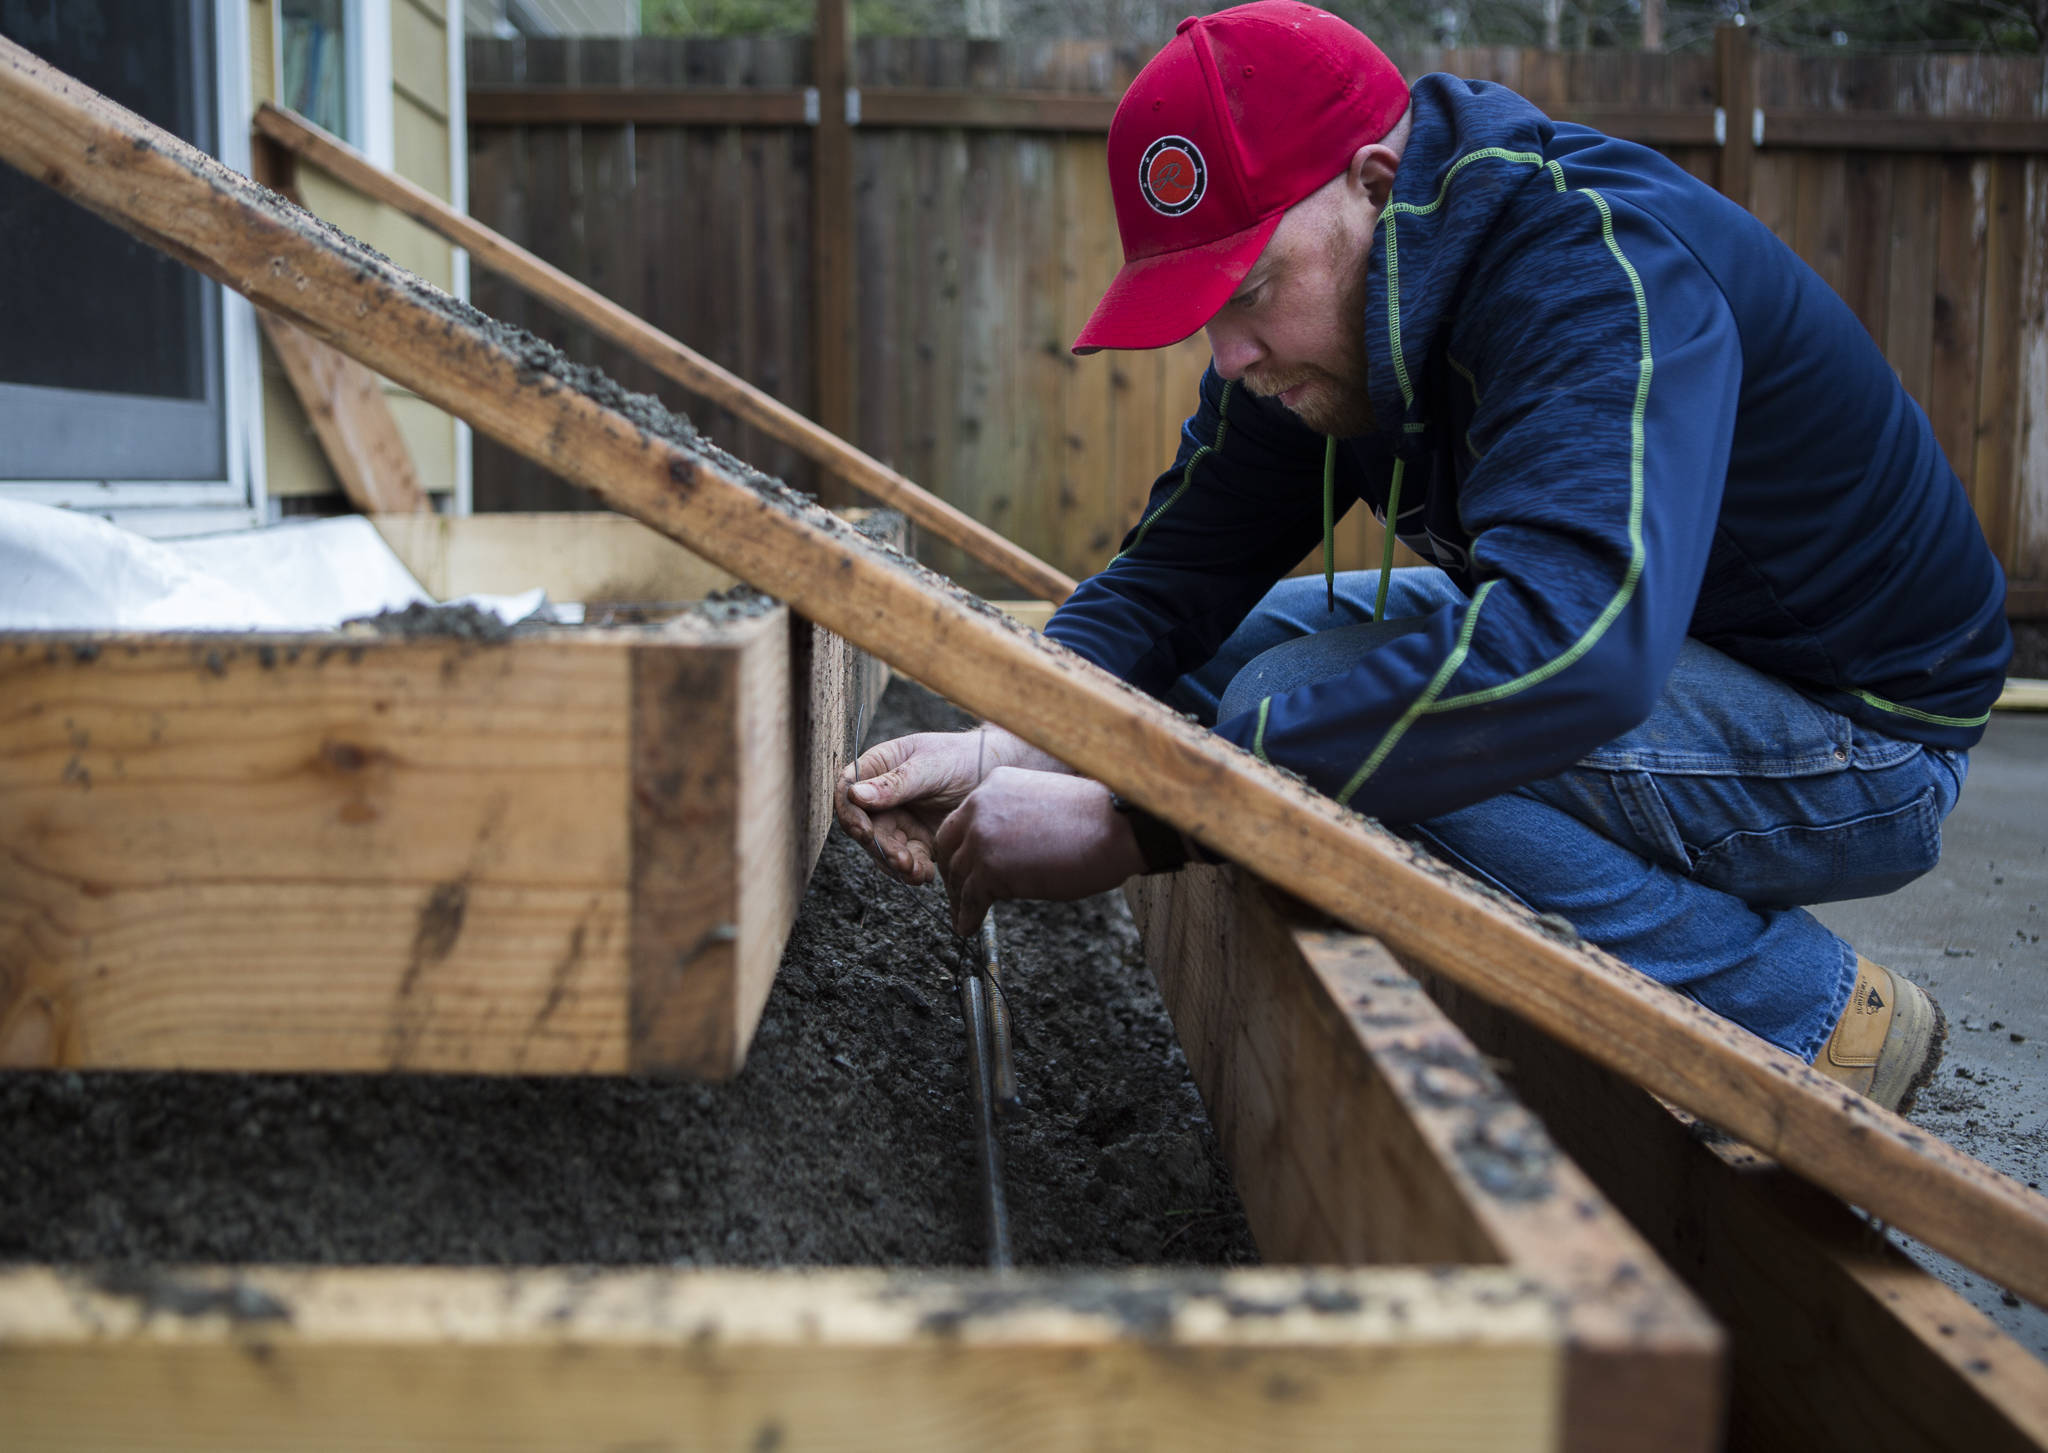 Adam Ling secures rebar reinforcement for a set of stairs at a home in Lynnwood. (Olivia Vanni / The Herald)